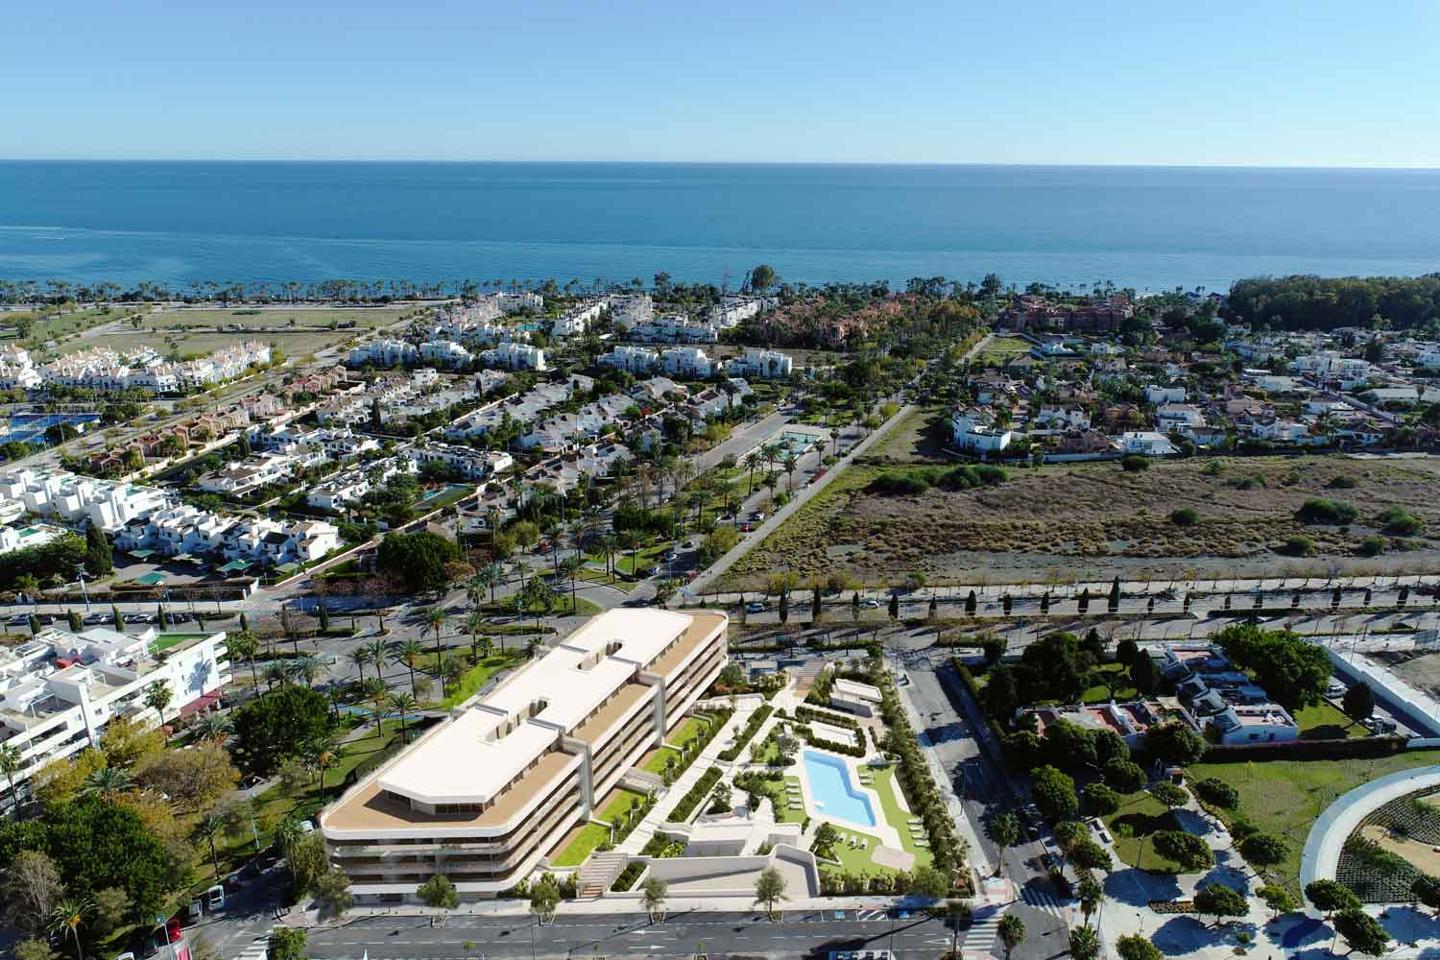 Penthouse for sale in Marbella - San Pedro and Guadalmina 4